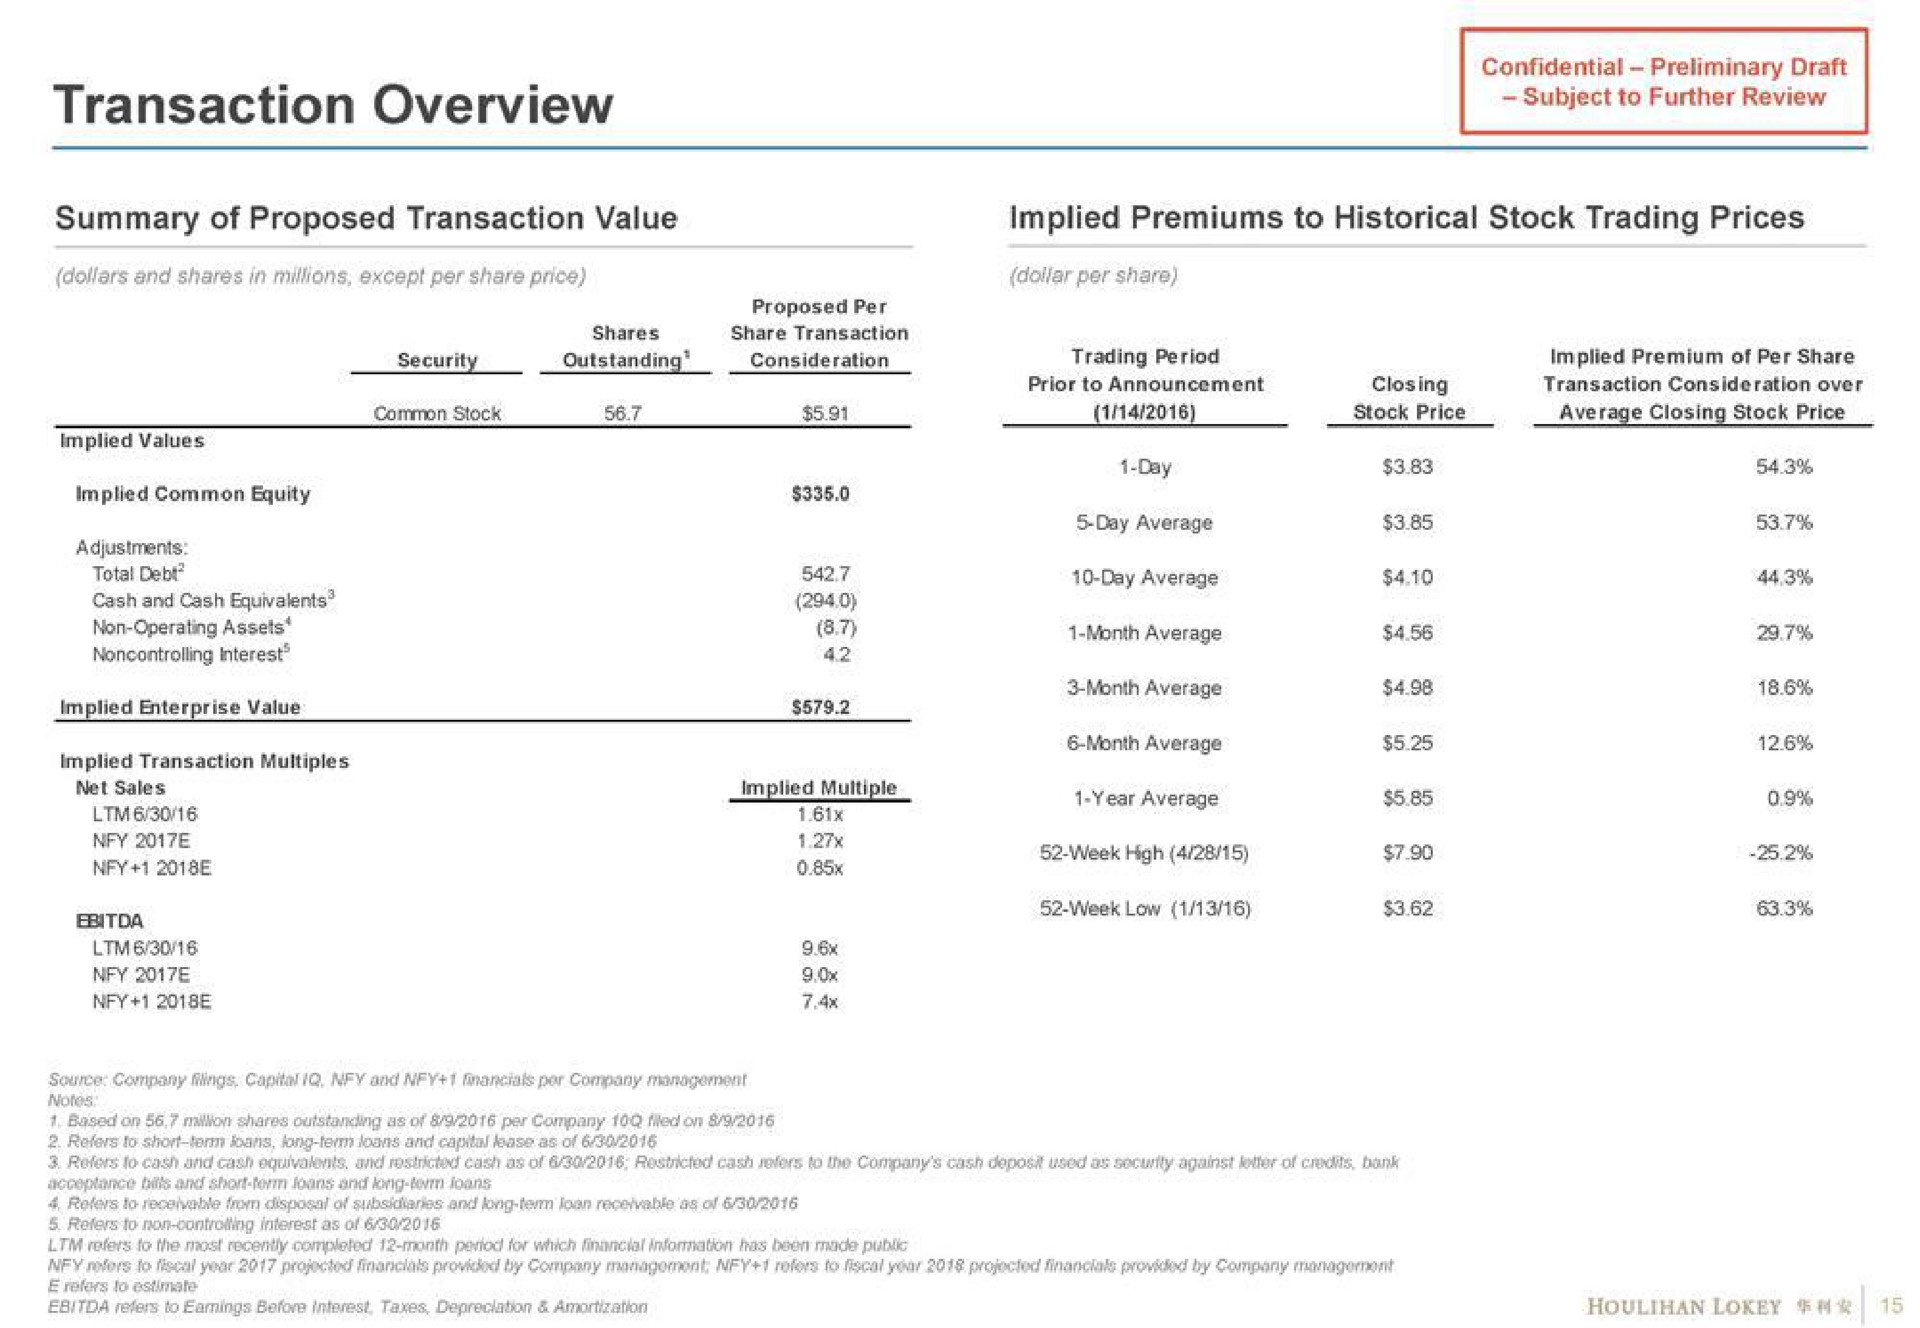 transaction overview summary of proposed transaction value implied premiums to historical stock trading prices | Houlihan Lokey